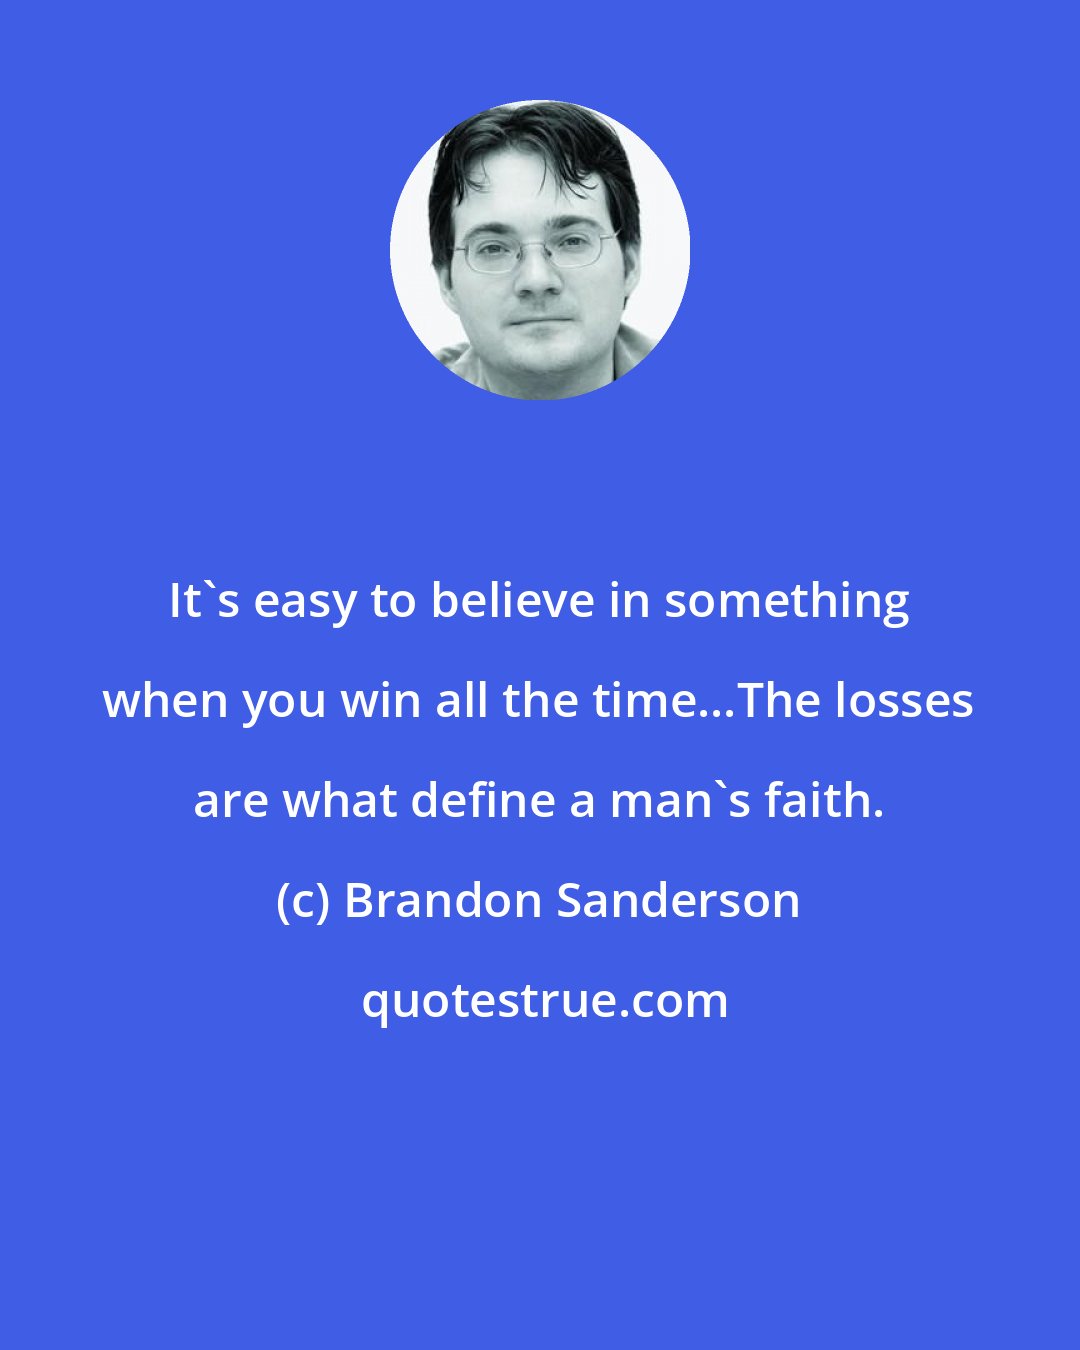 Brandon Sanderson: It's easy to believe in something when you win all the time...The losses are what define a man's faith.